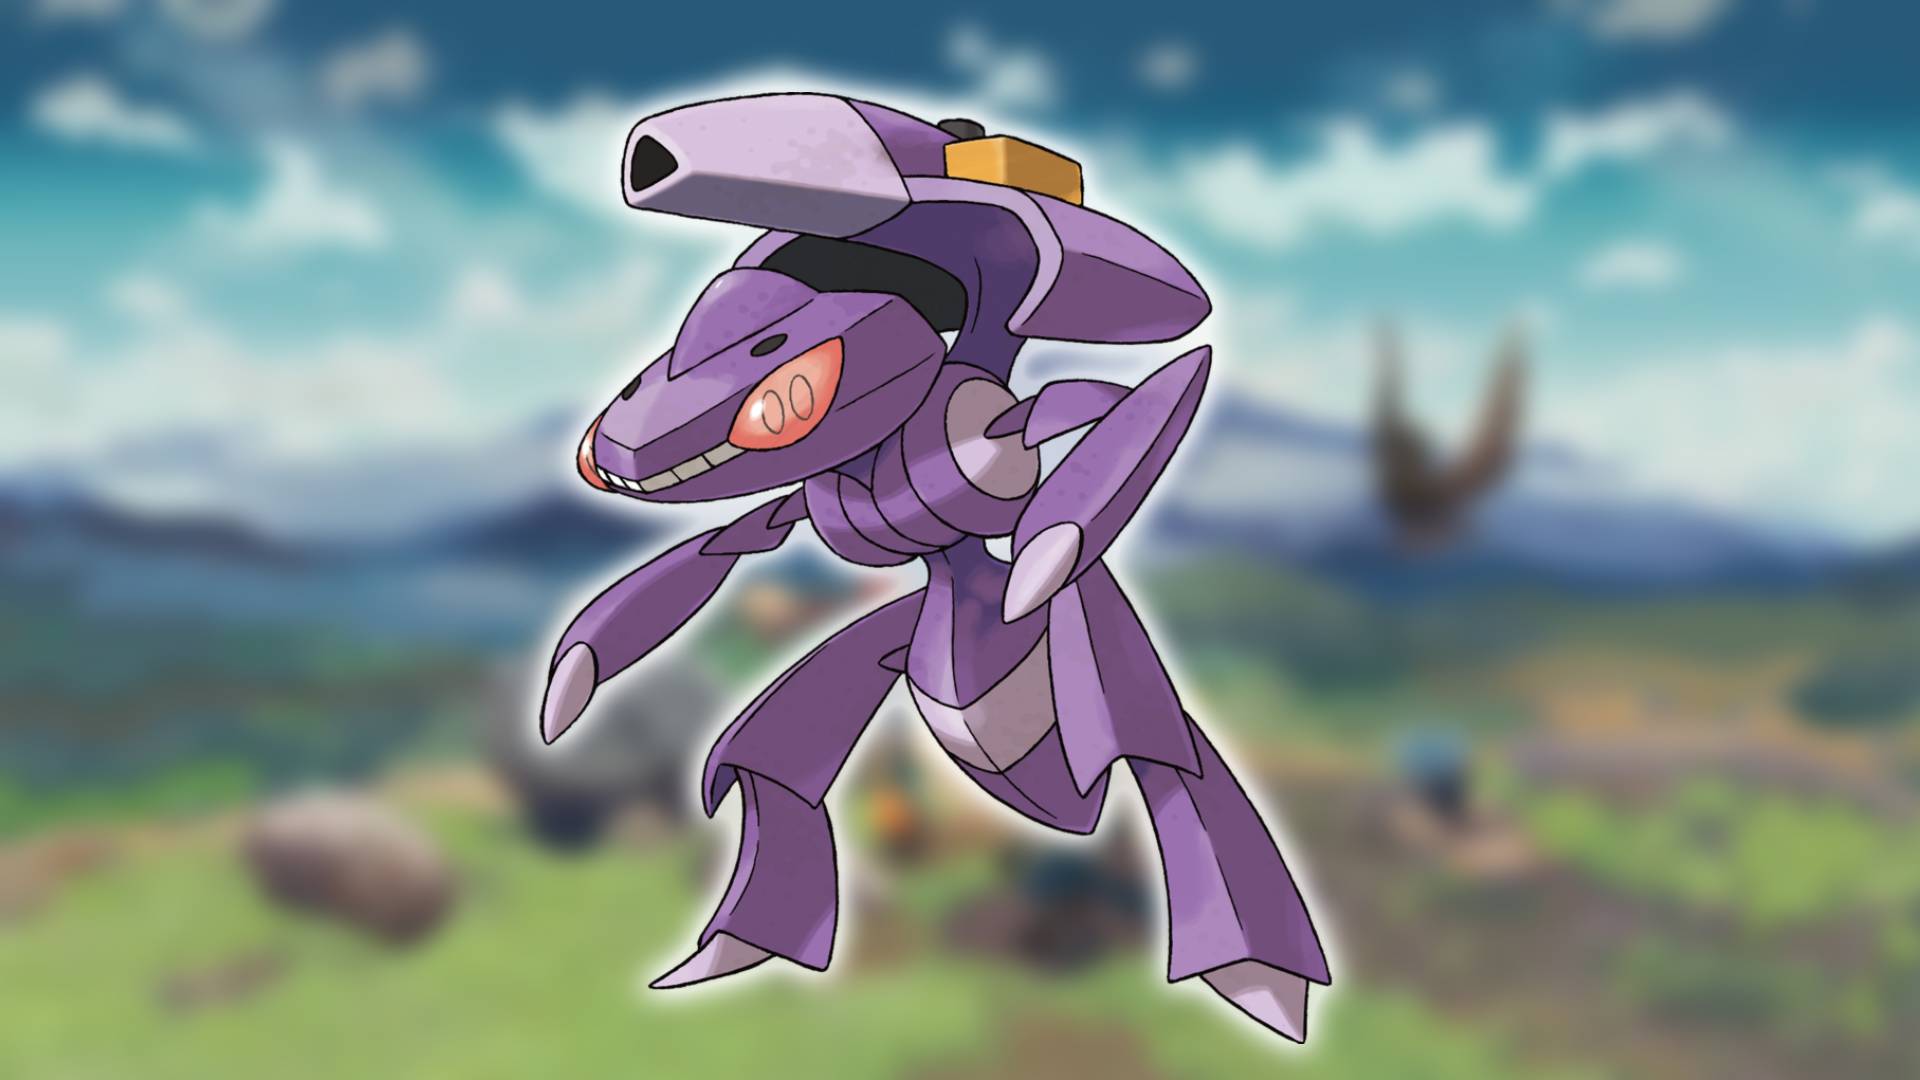 How to get the Mythical Legend Genesect in Pokémon XY & ORAS Tutorial. 